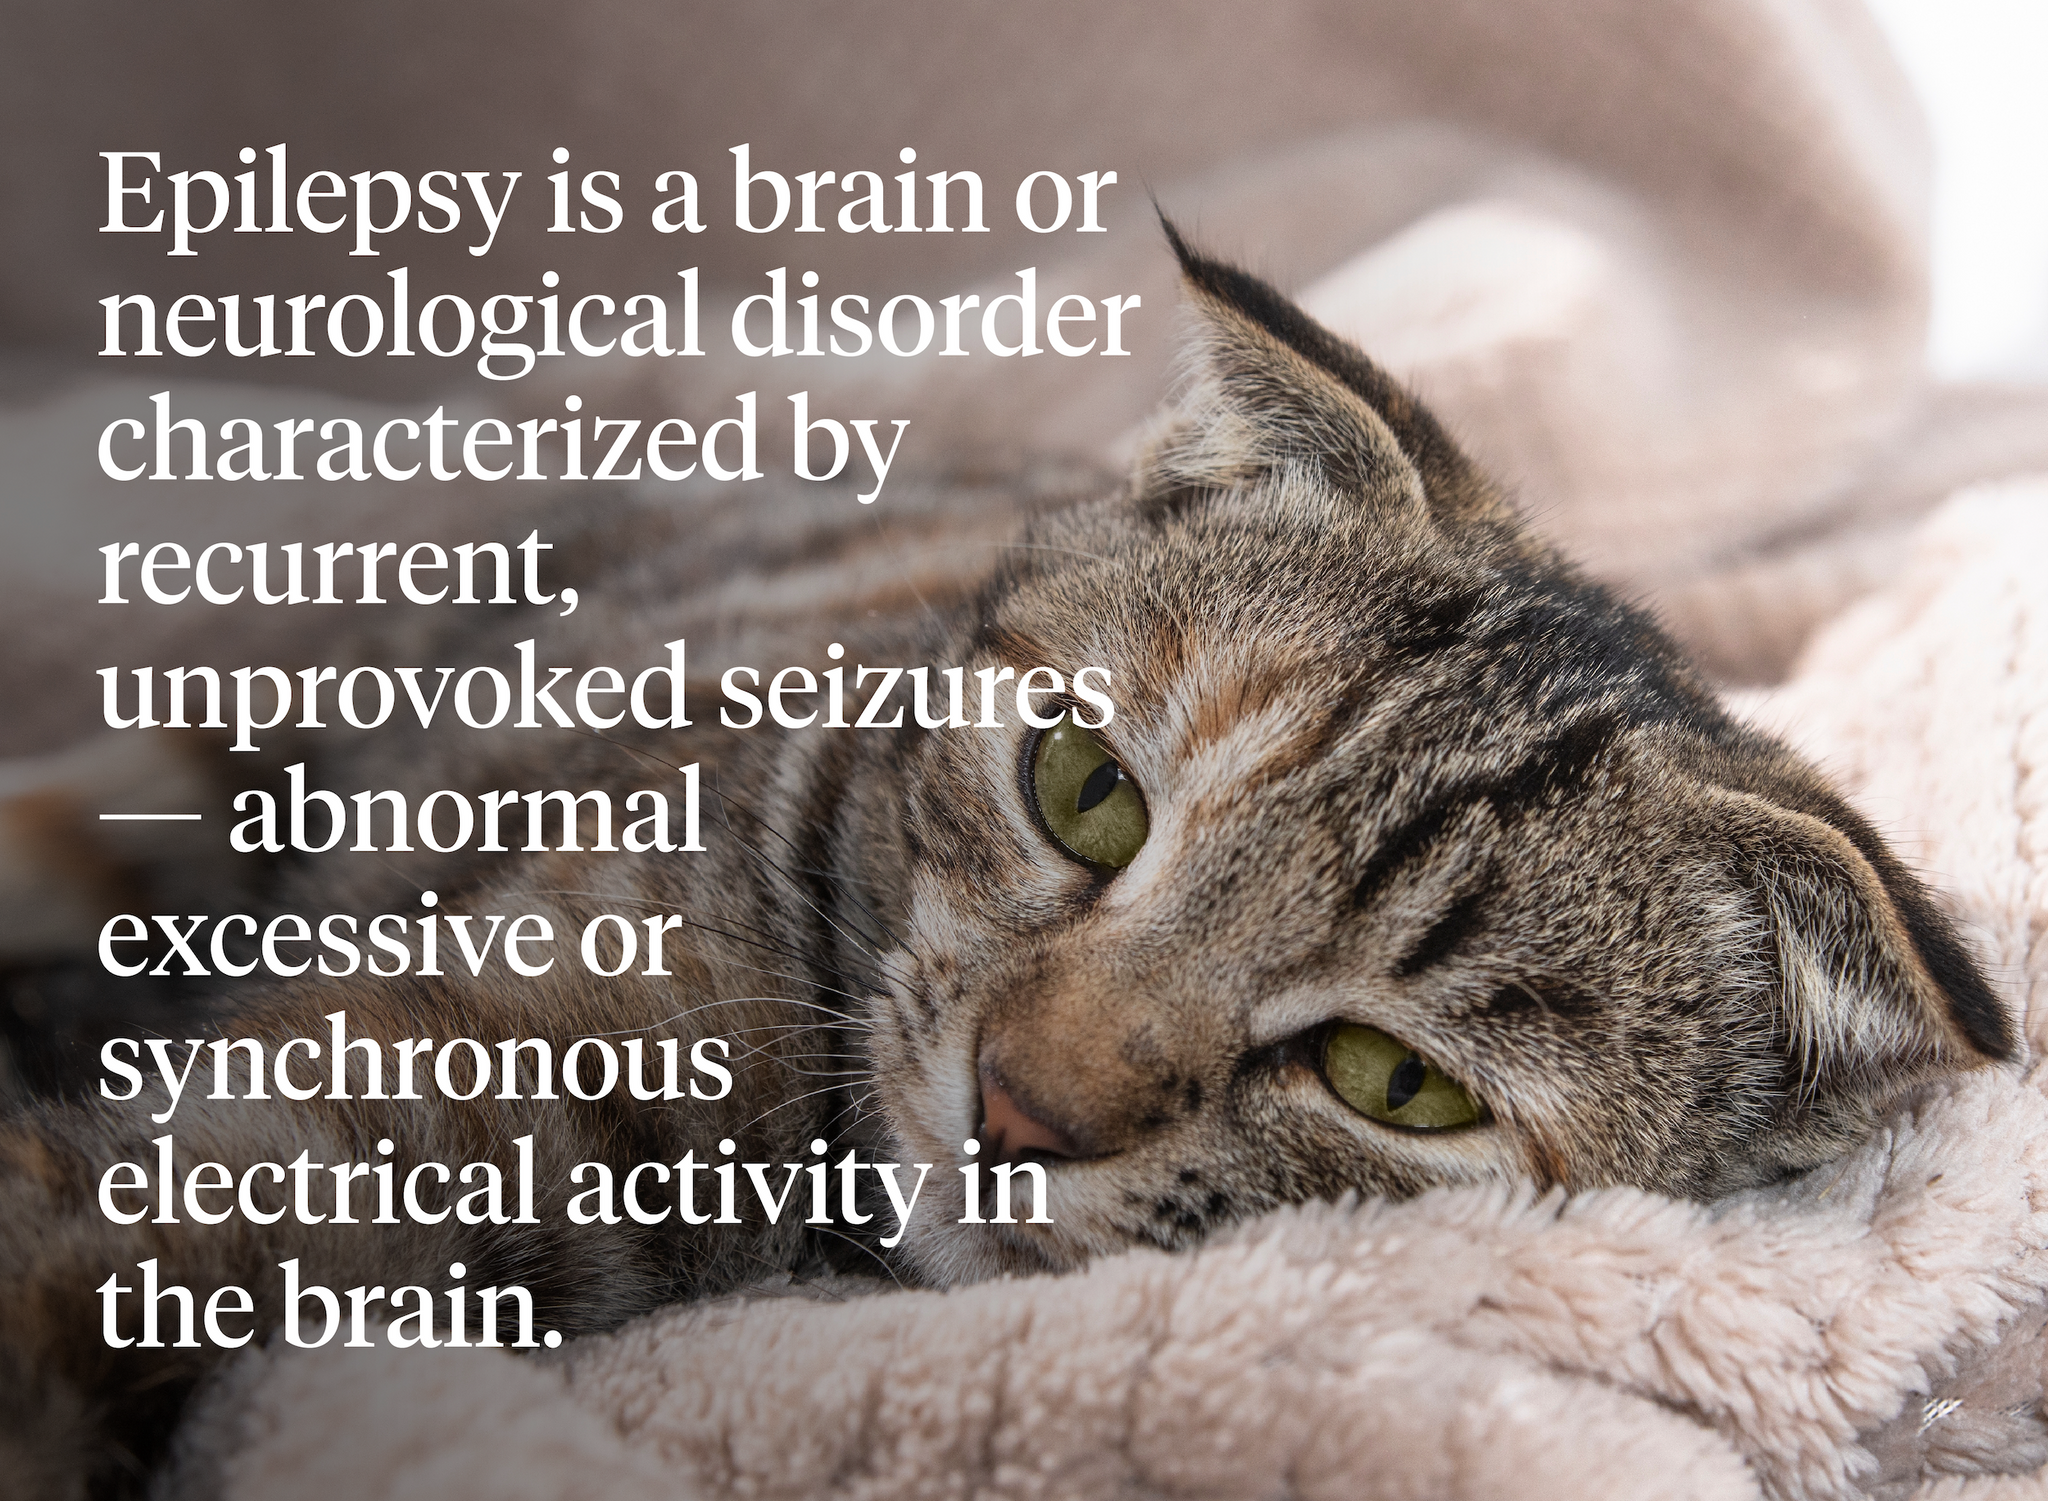 Definition of epilepsy in cats